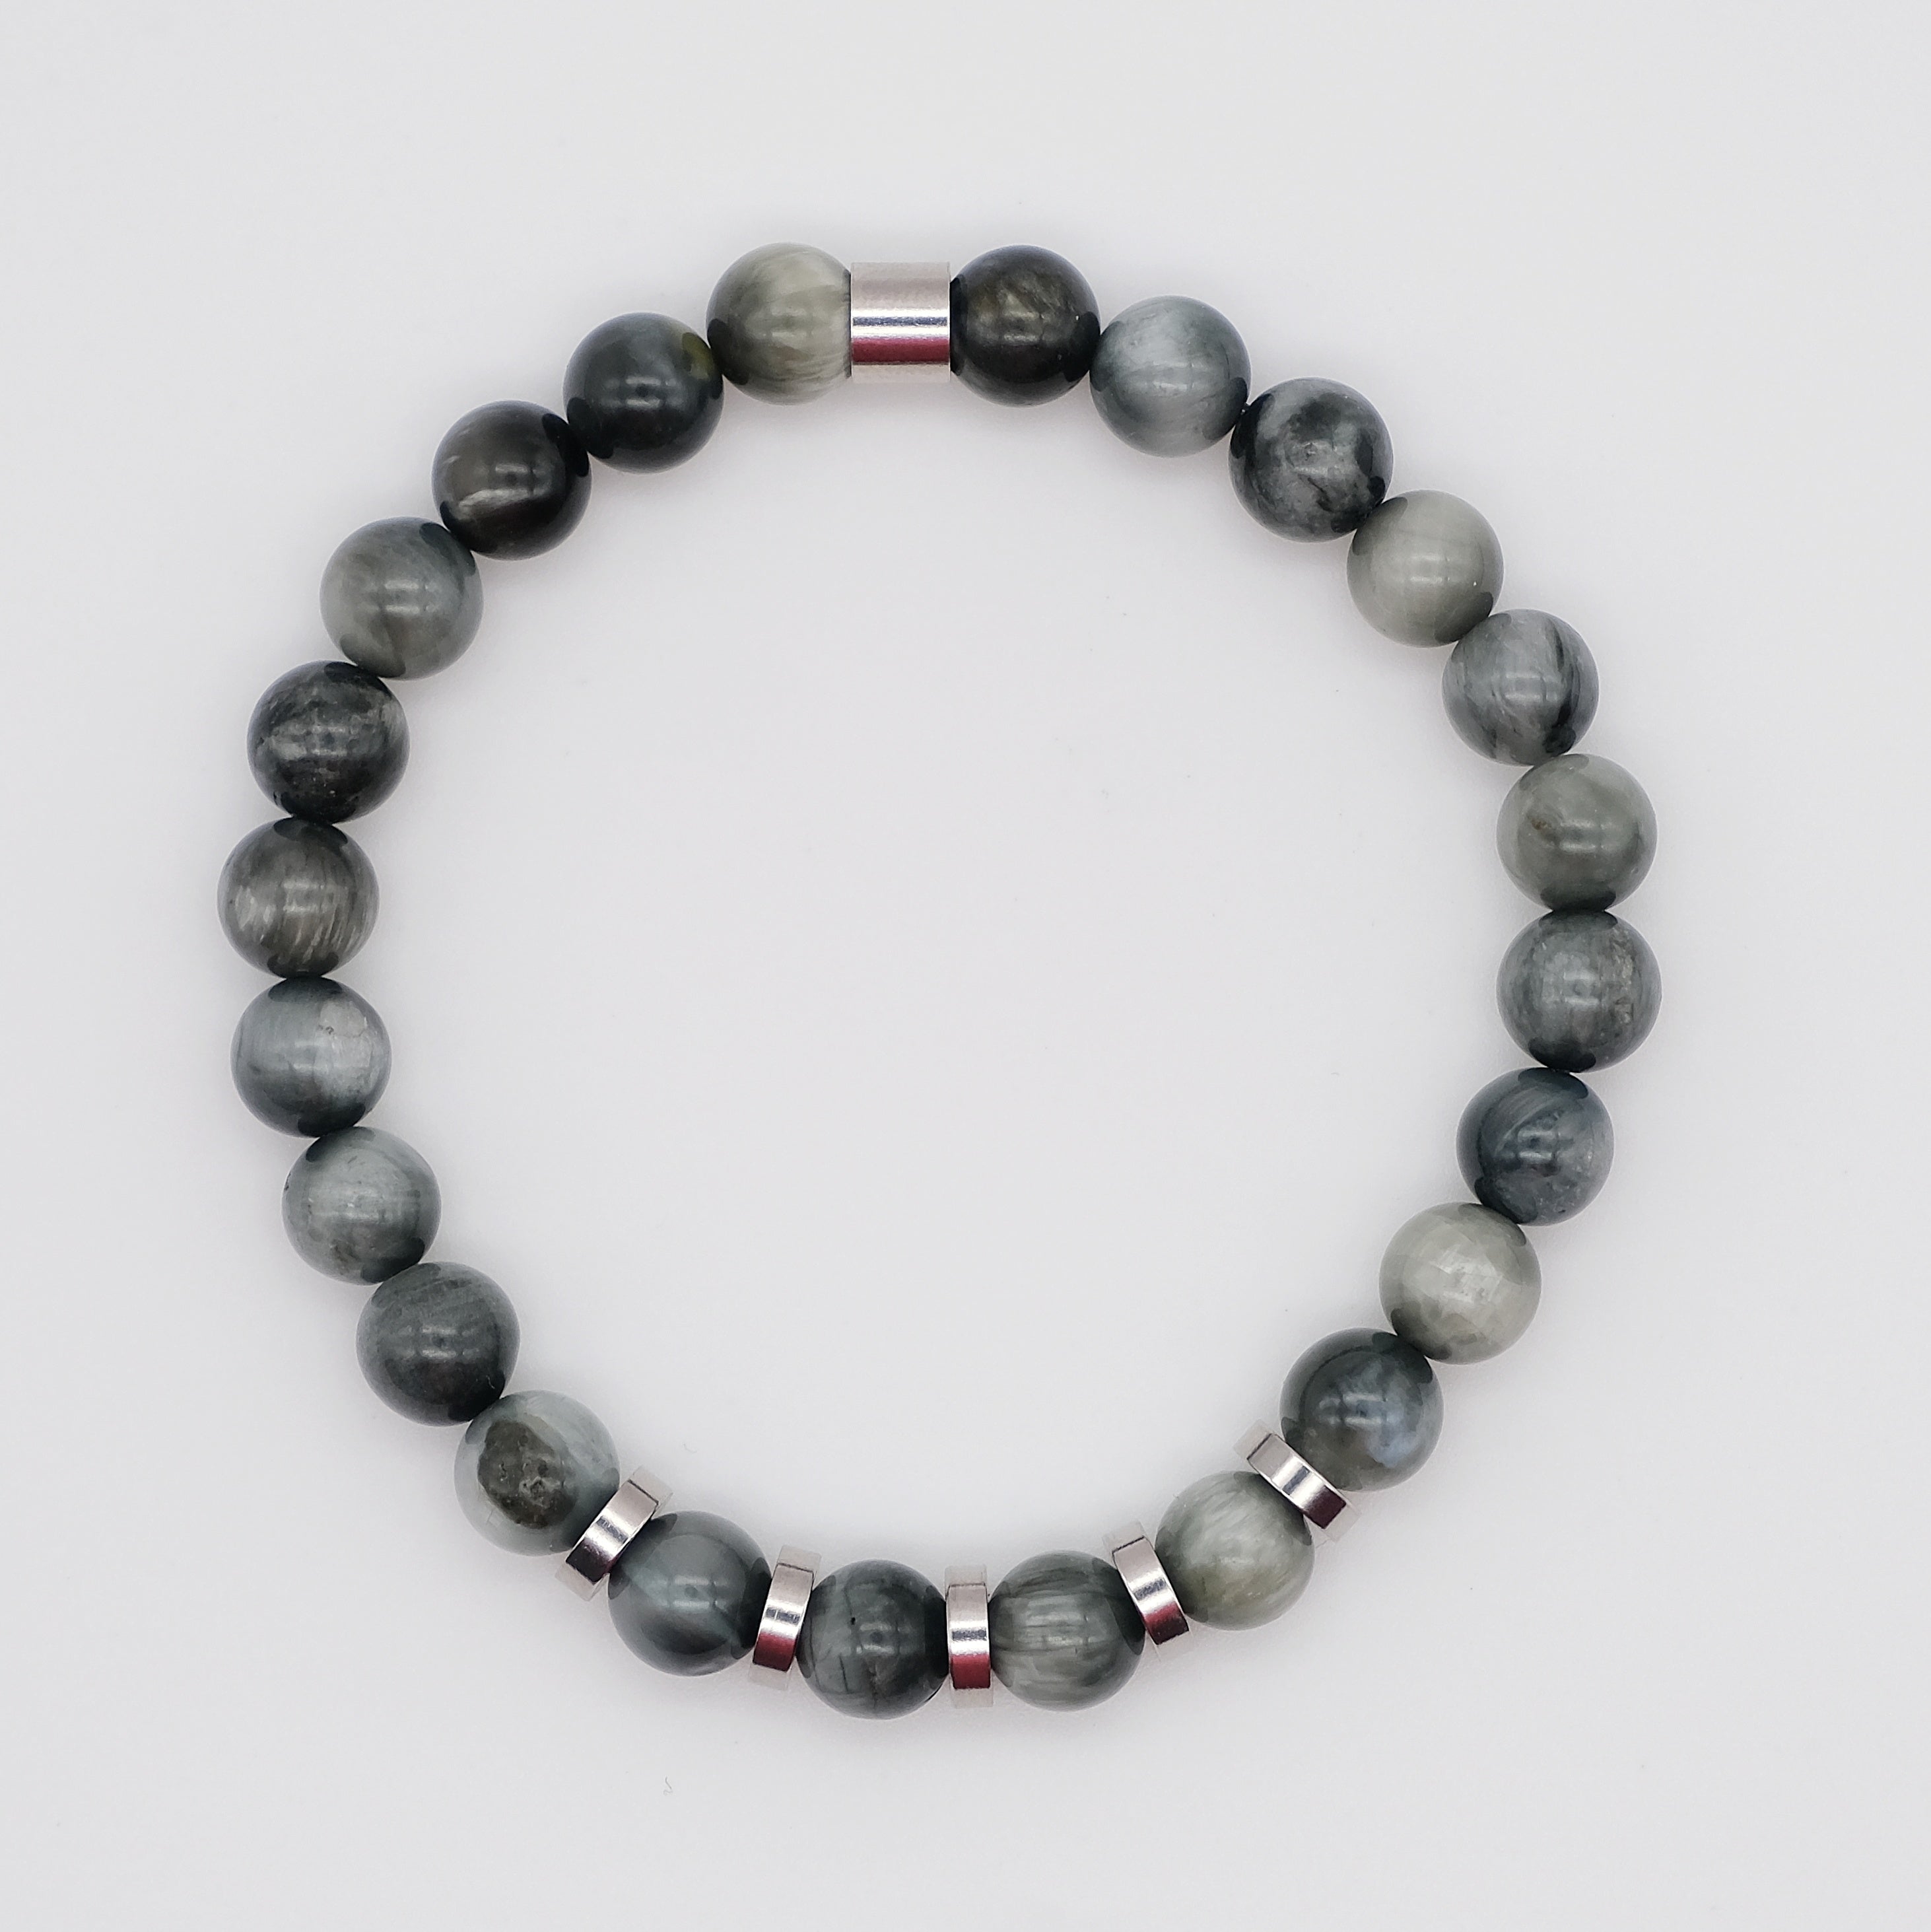 Eagle eye gemstone bracelet with steel accessories from above